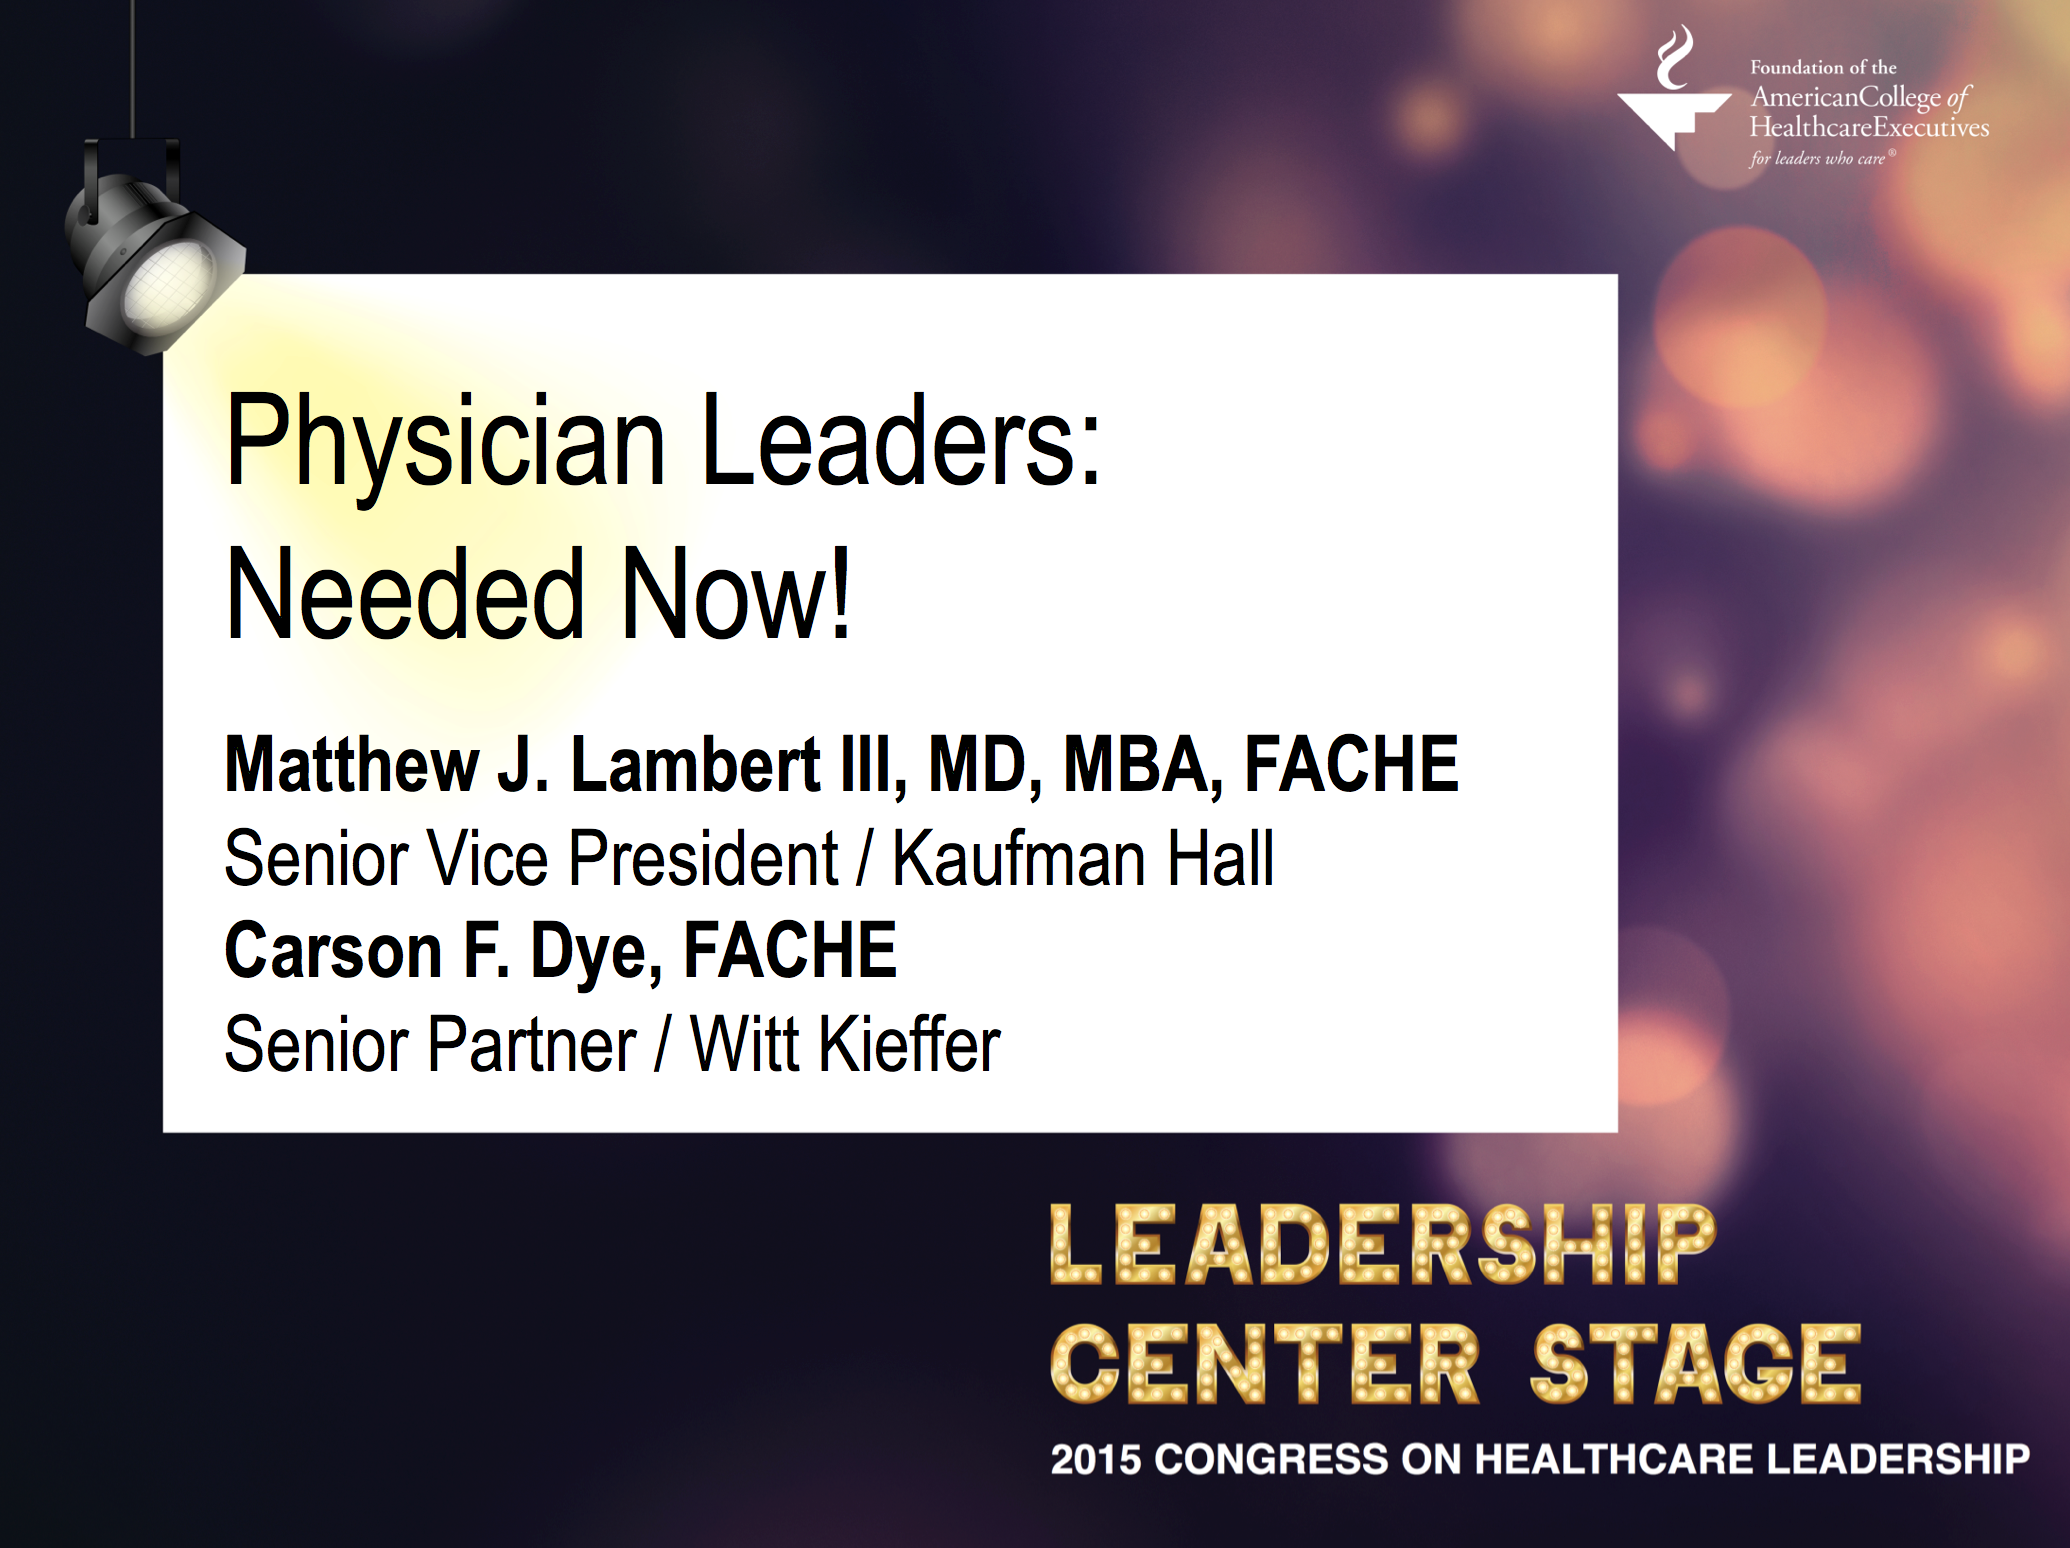 ACHE 2015 Hot Topic - Physician Leaders: Needed Now!